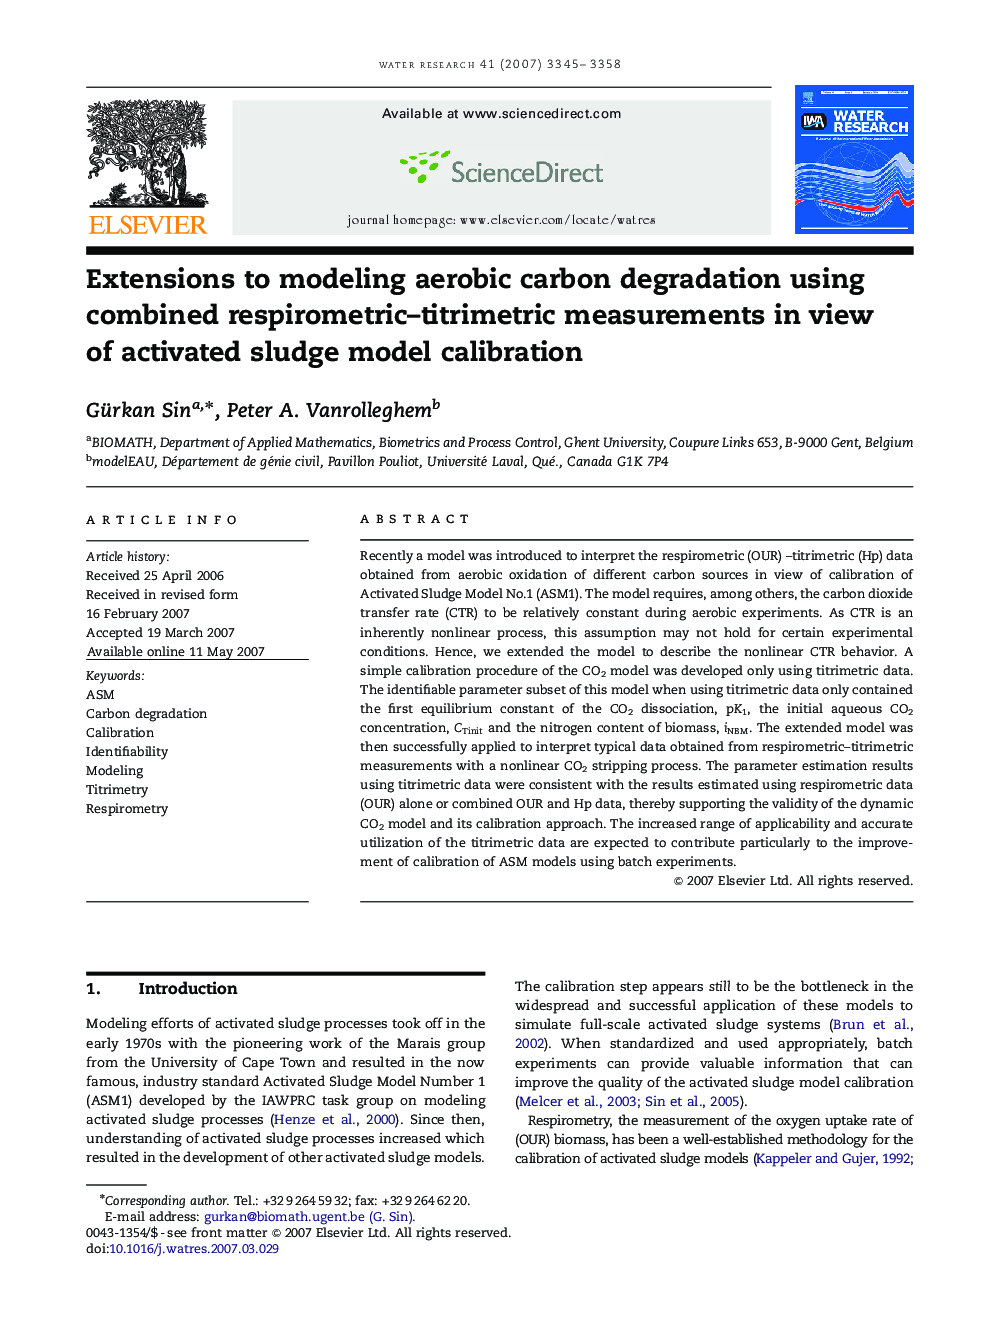 Extensions to modeling aerobic carbon degradation using combined respirometric–titrimetric measurements in view of activated sludge model calibration